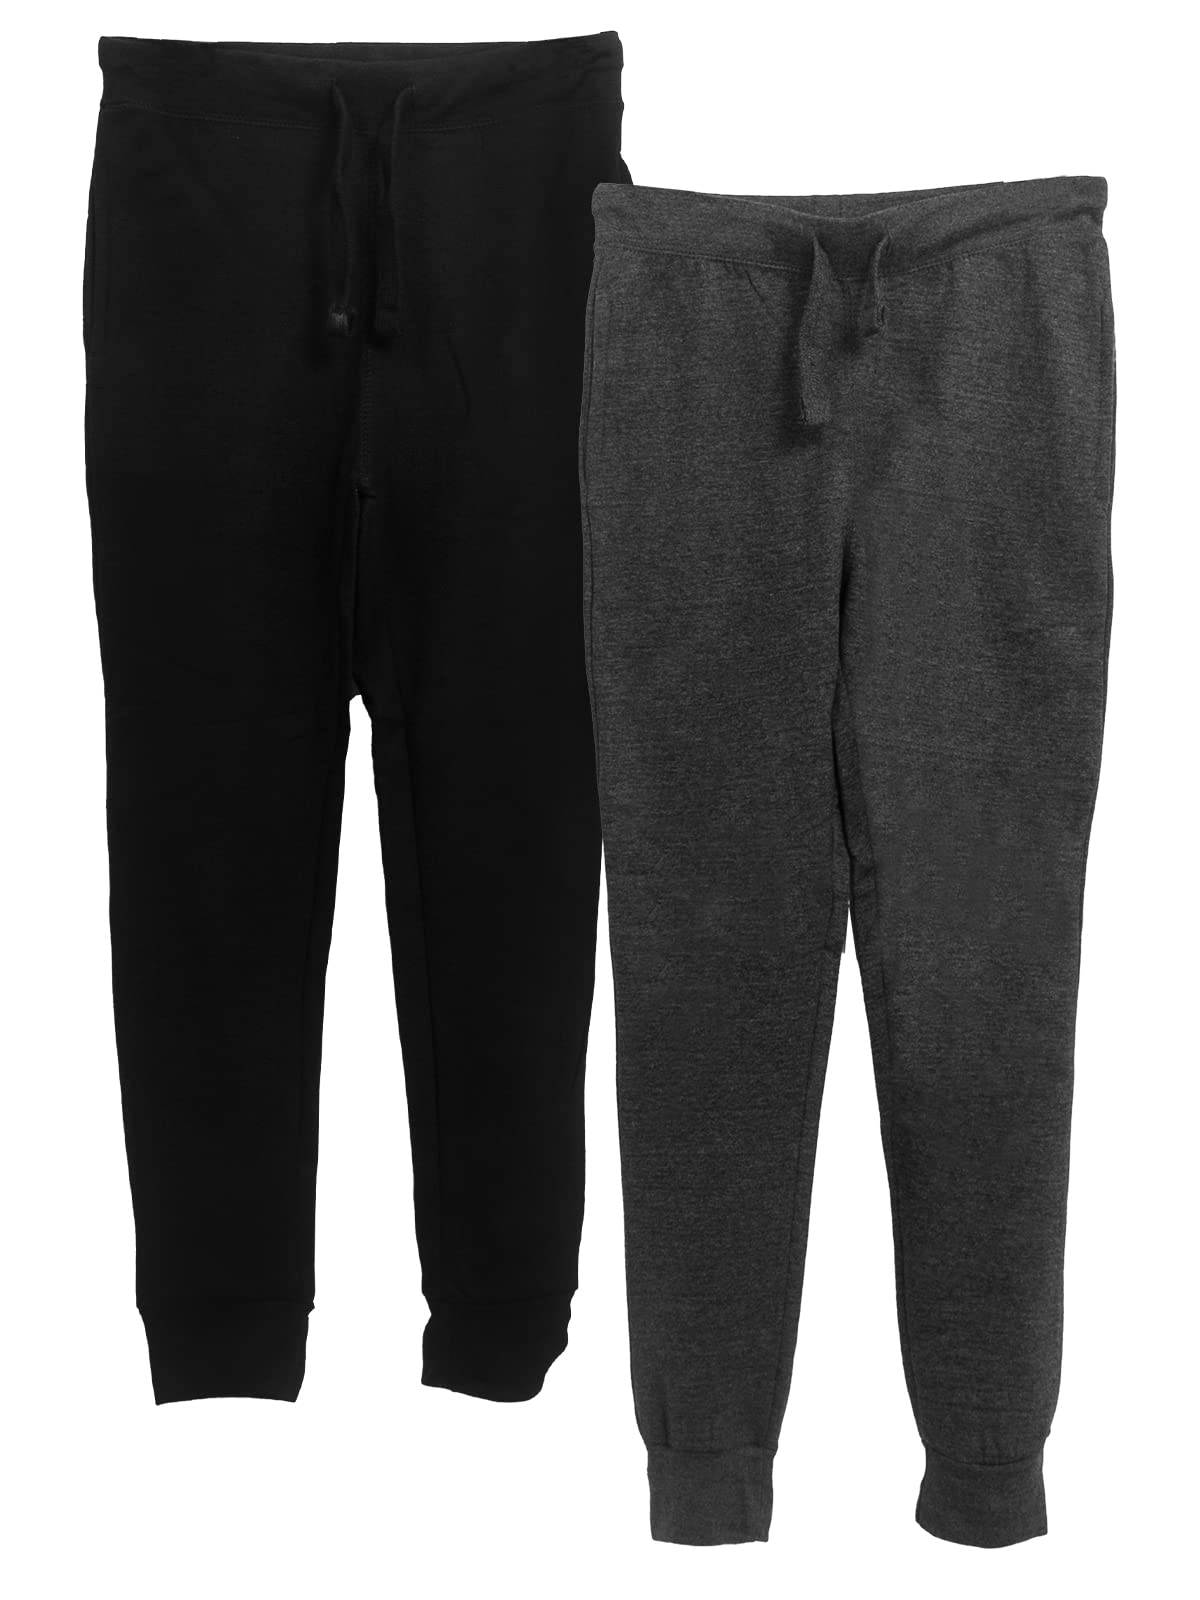 BROOKLYN VERTICAL 2-Pack Boys Cotton Joggers Pant|Soft Comfortable Cotton,Drawstring Pull,Pockets| Small-XL